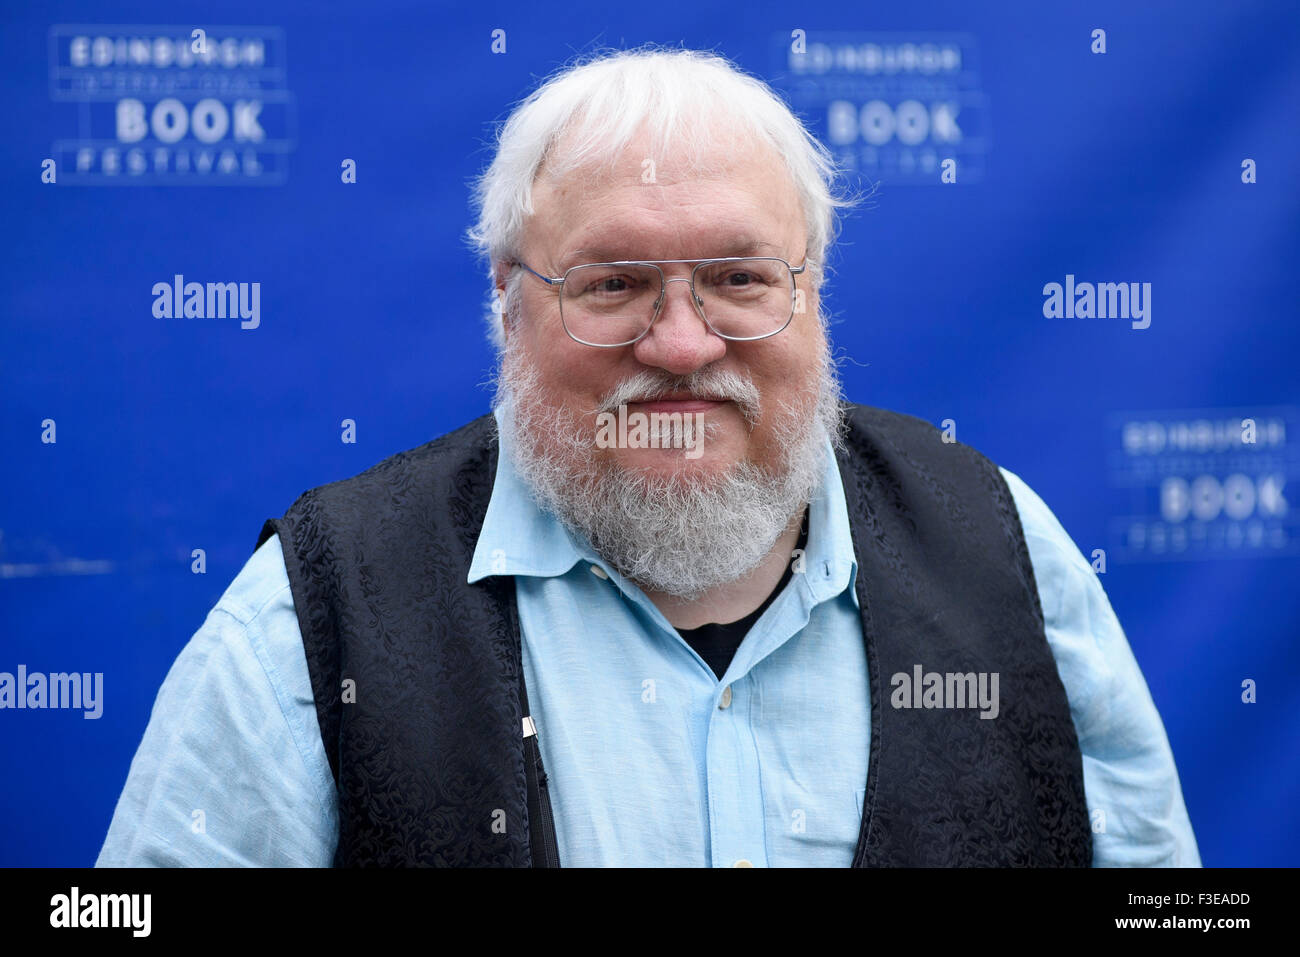 A Clash of Kings Book 2 from A Song of Ice and Fire by George RR Martin  Stock Photo - Alamy